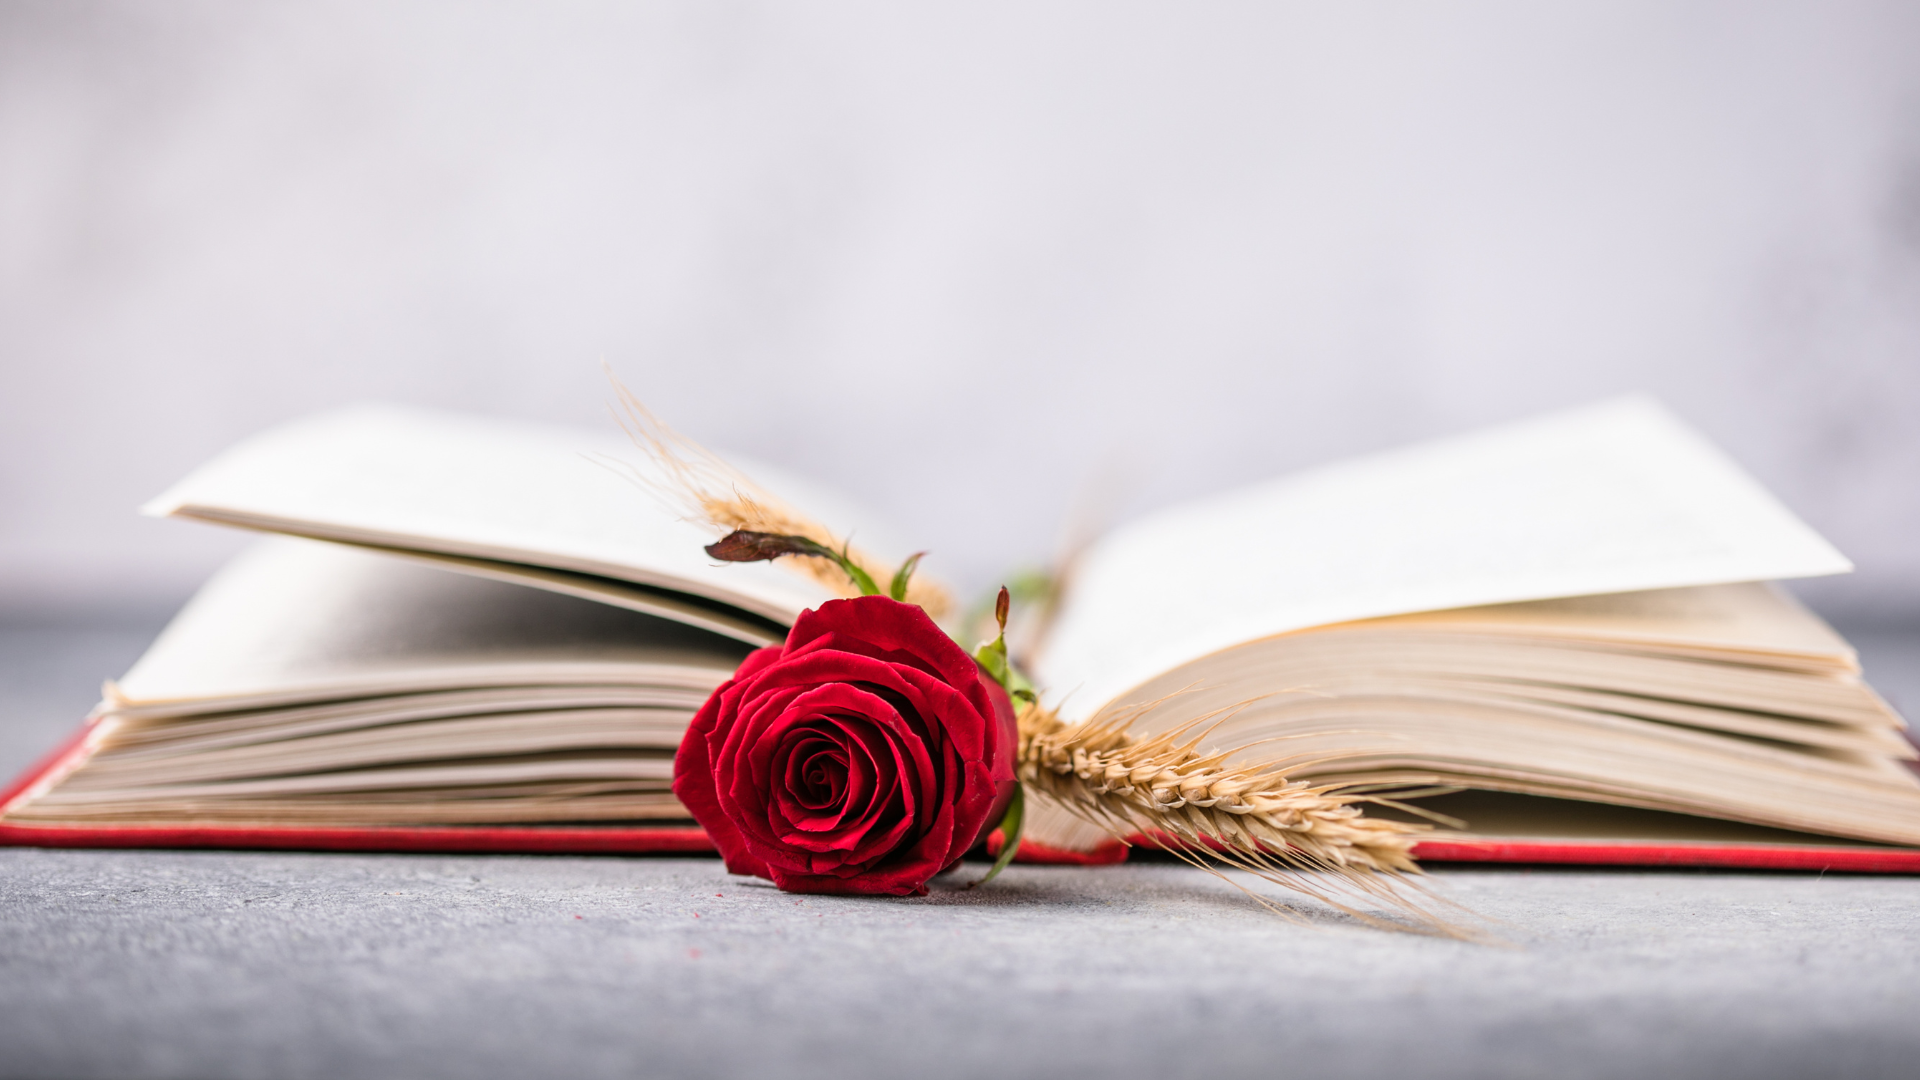 A red rose is sitting on top of an open book.